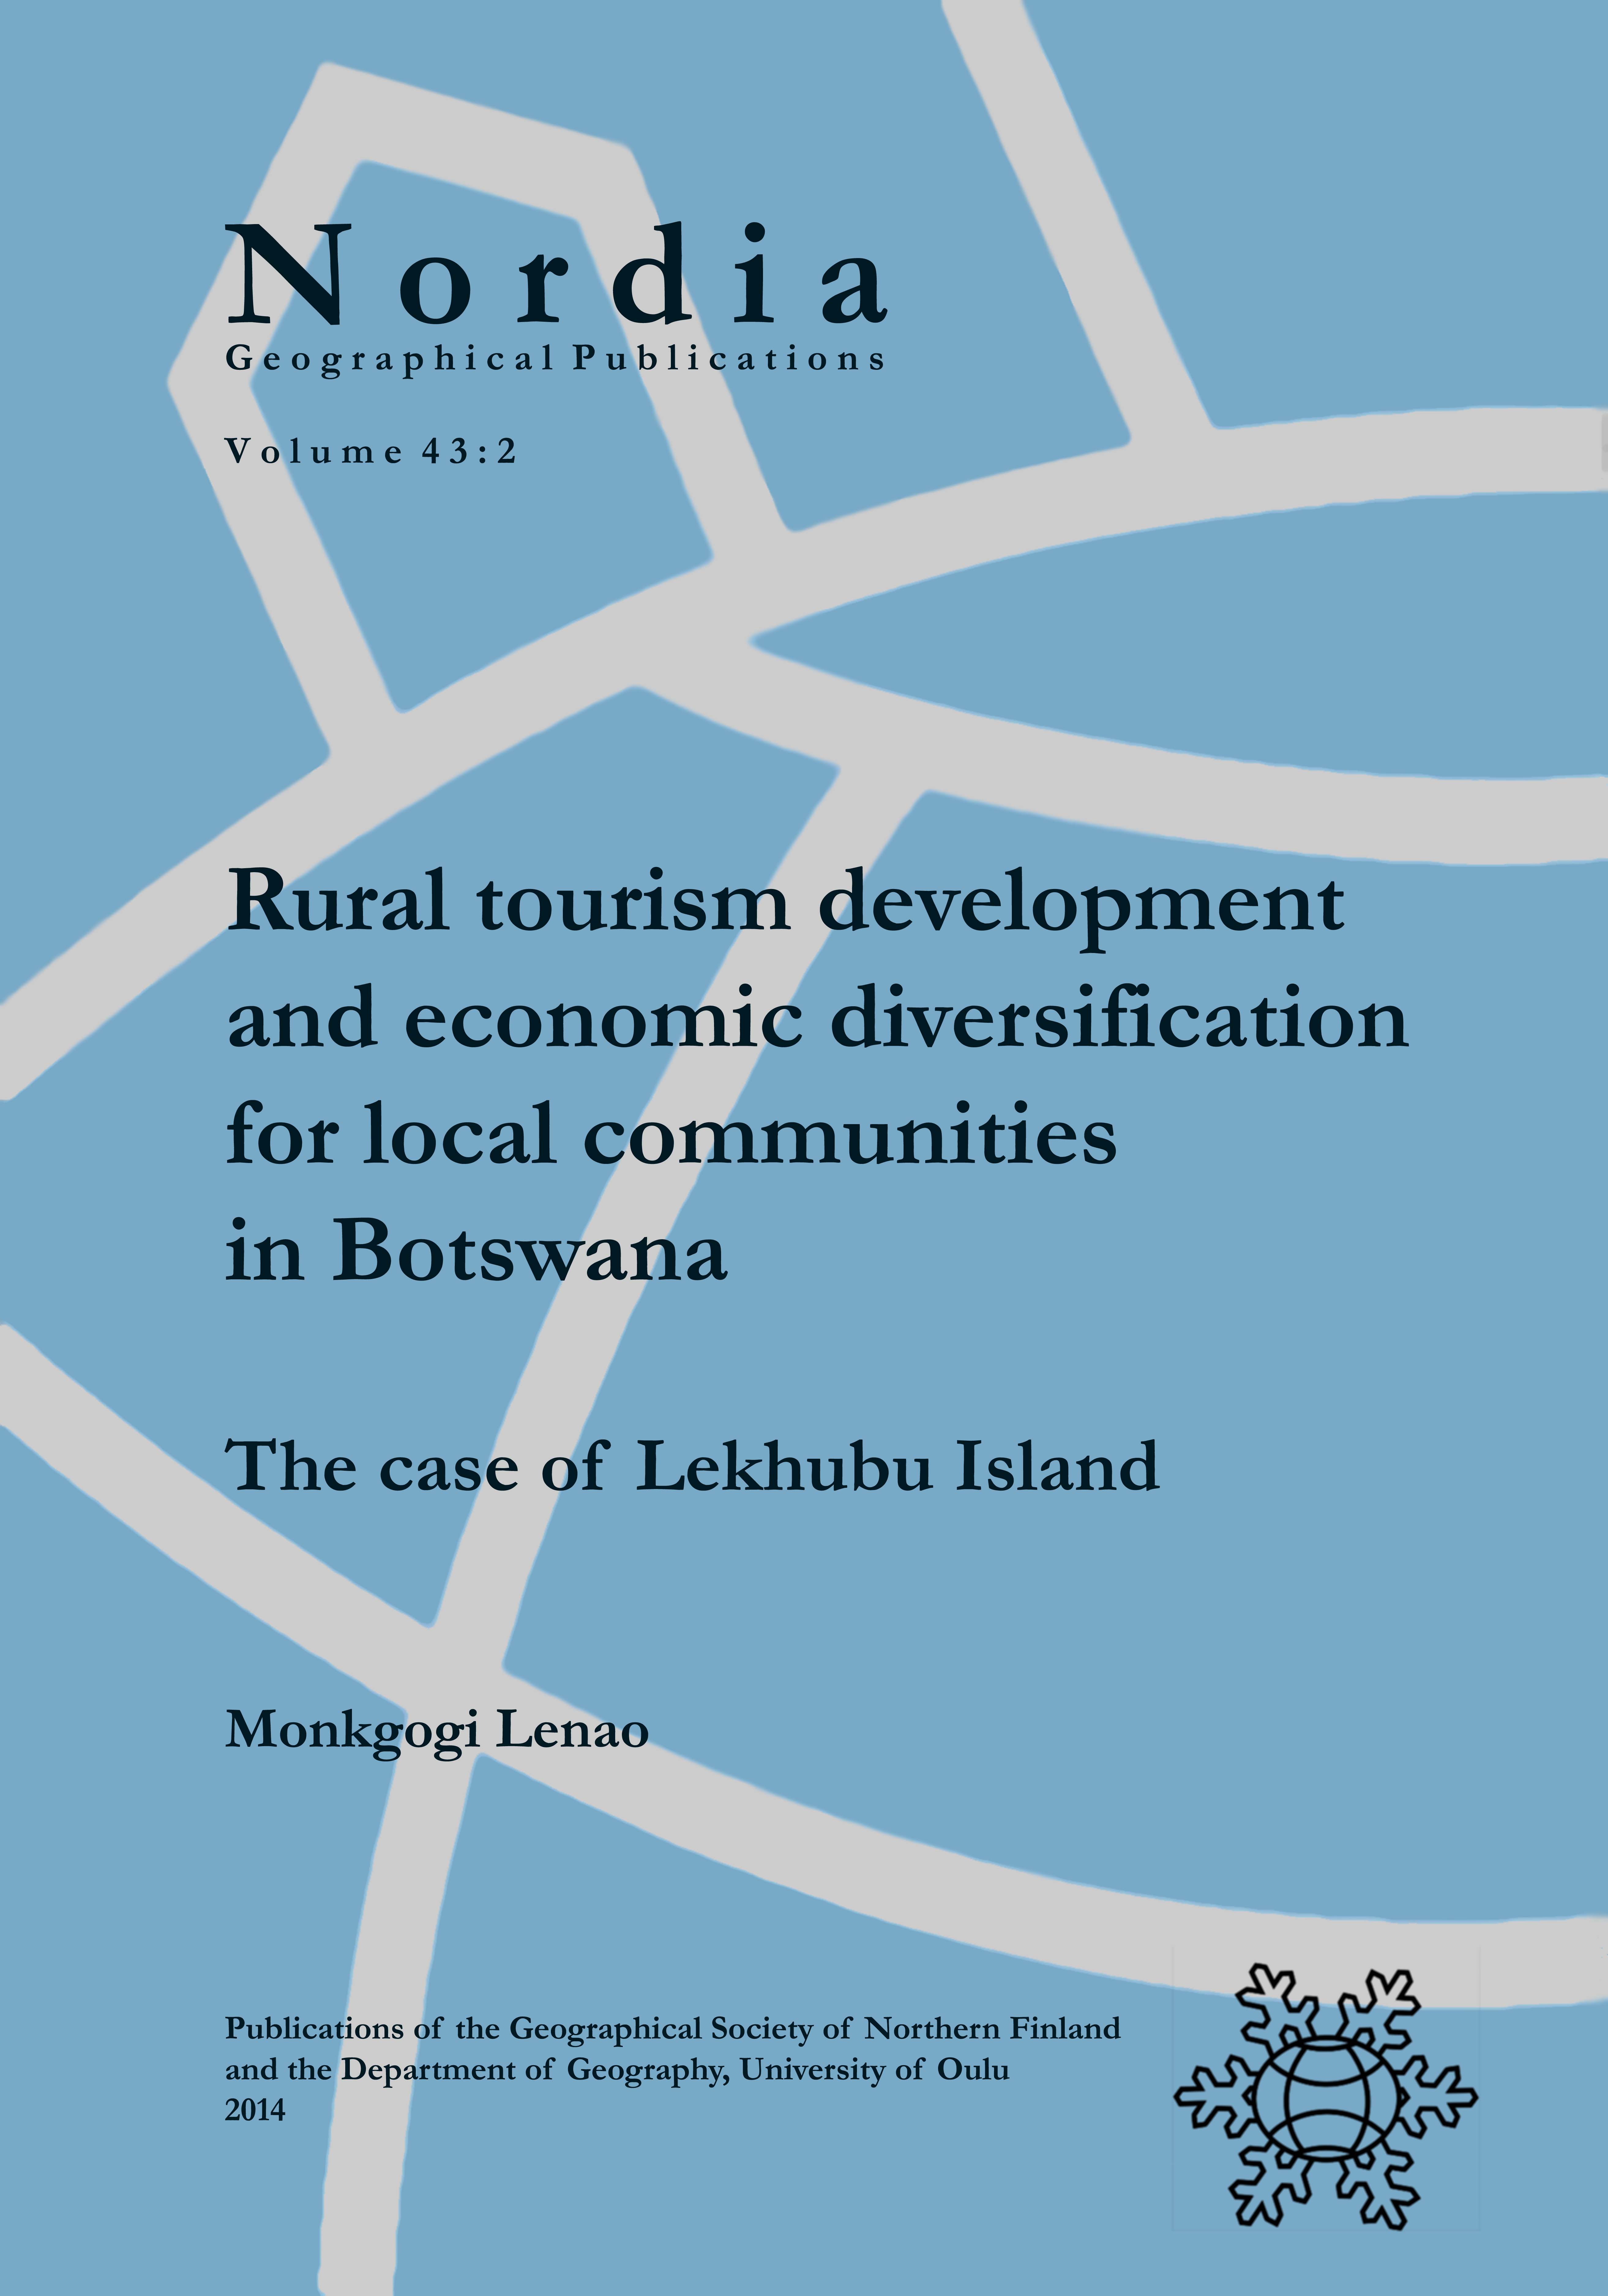 					View Vol. 43 No. 2 (2014): Rural tourism development and economic diversification for local communities in Botswana: The case of Lekhubu Island
				